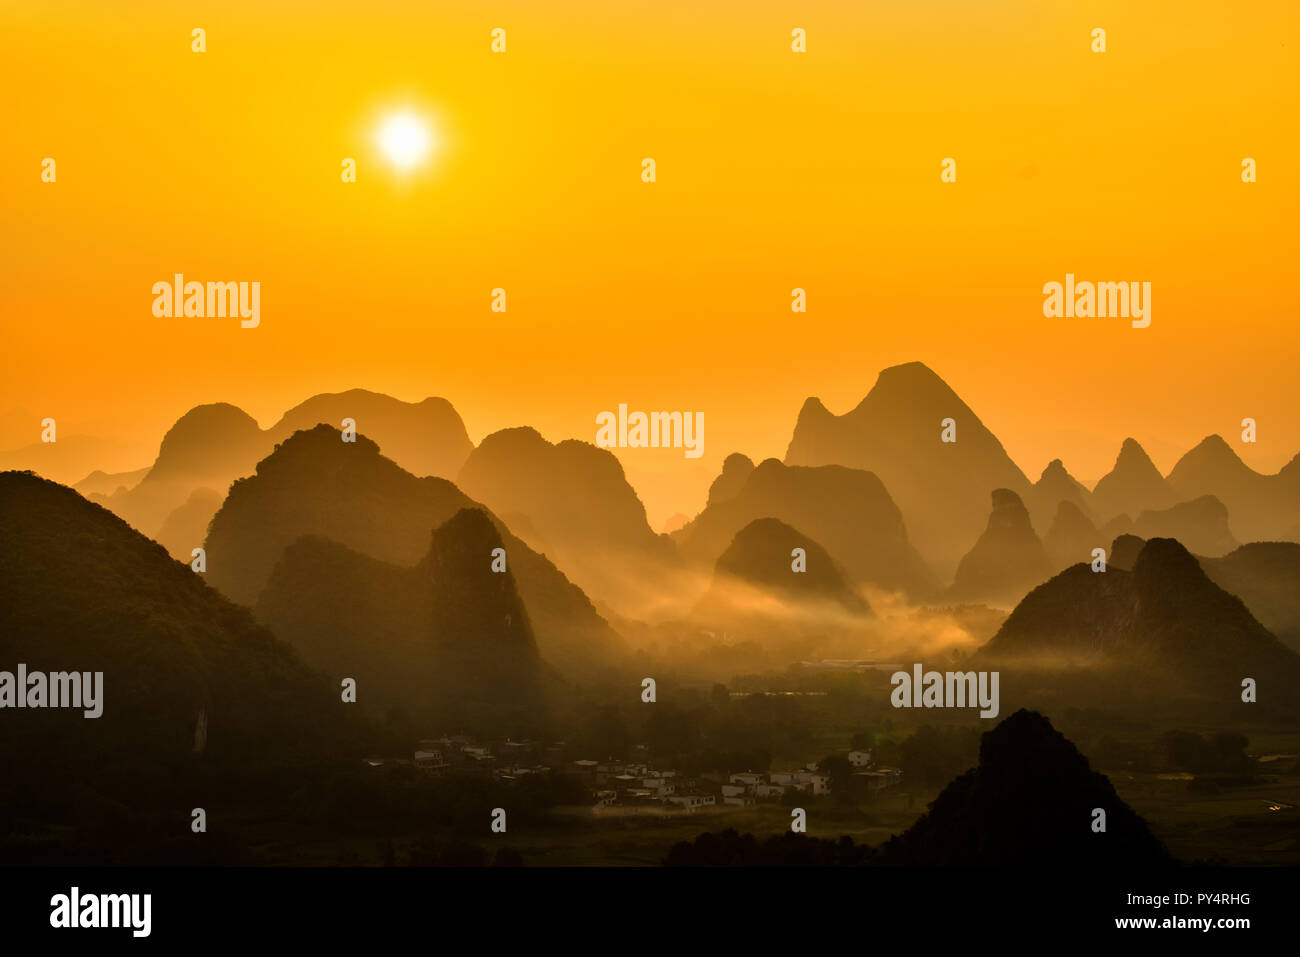 Sunrise Landscape of Guilin , Li River and Karst mountains called Xingping mount, Guangxi Province, China Stock Photo